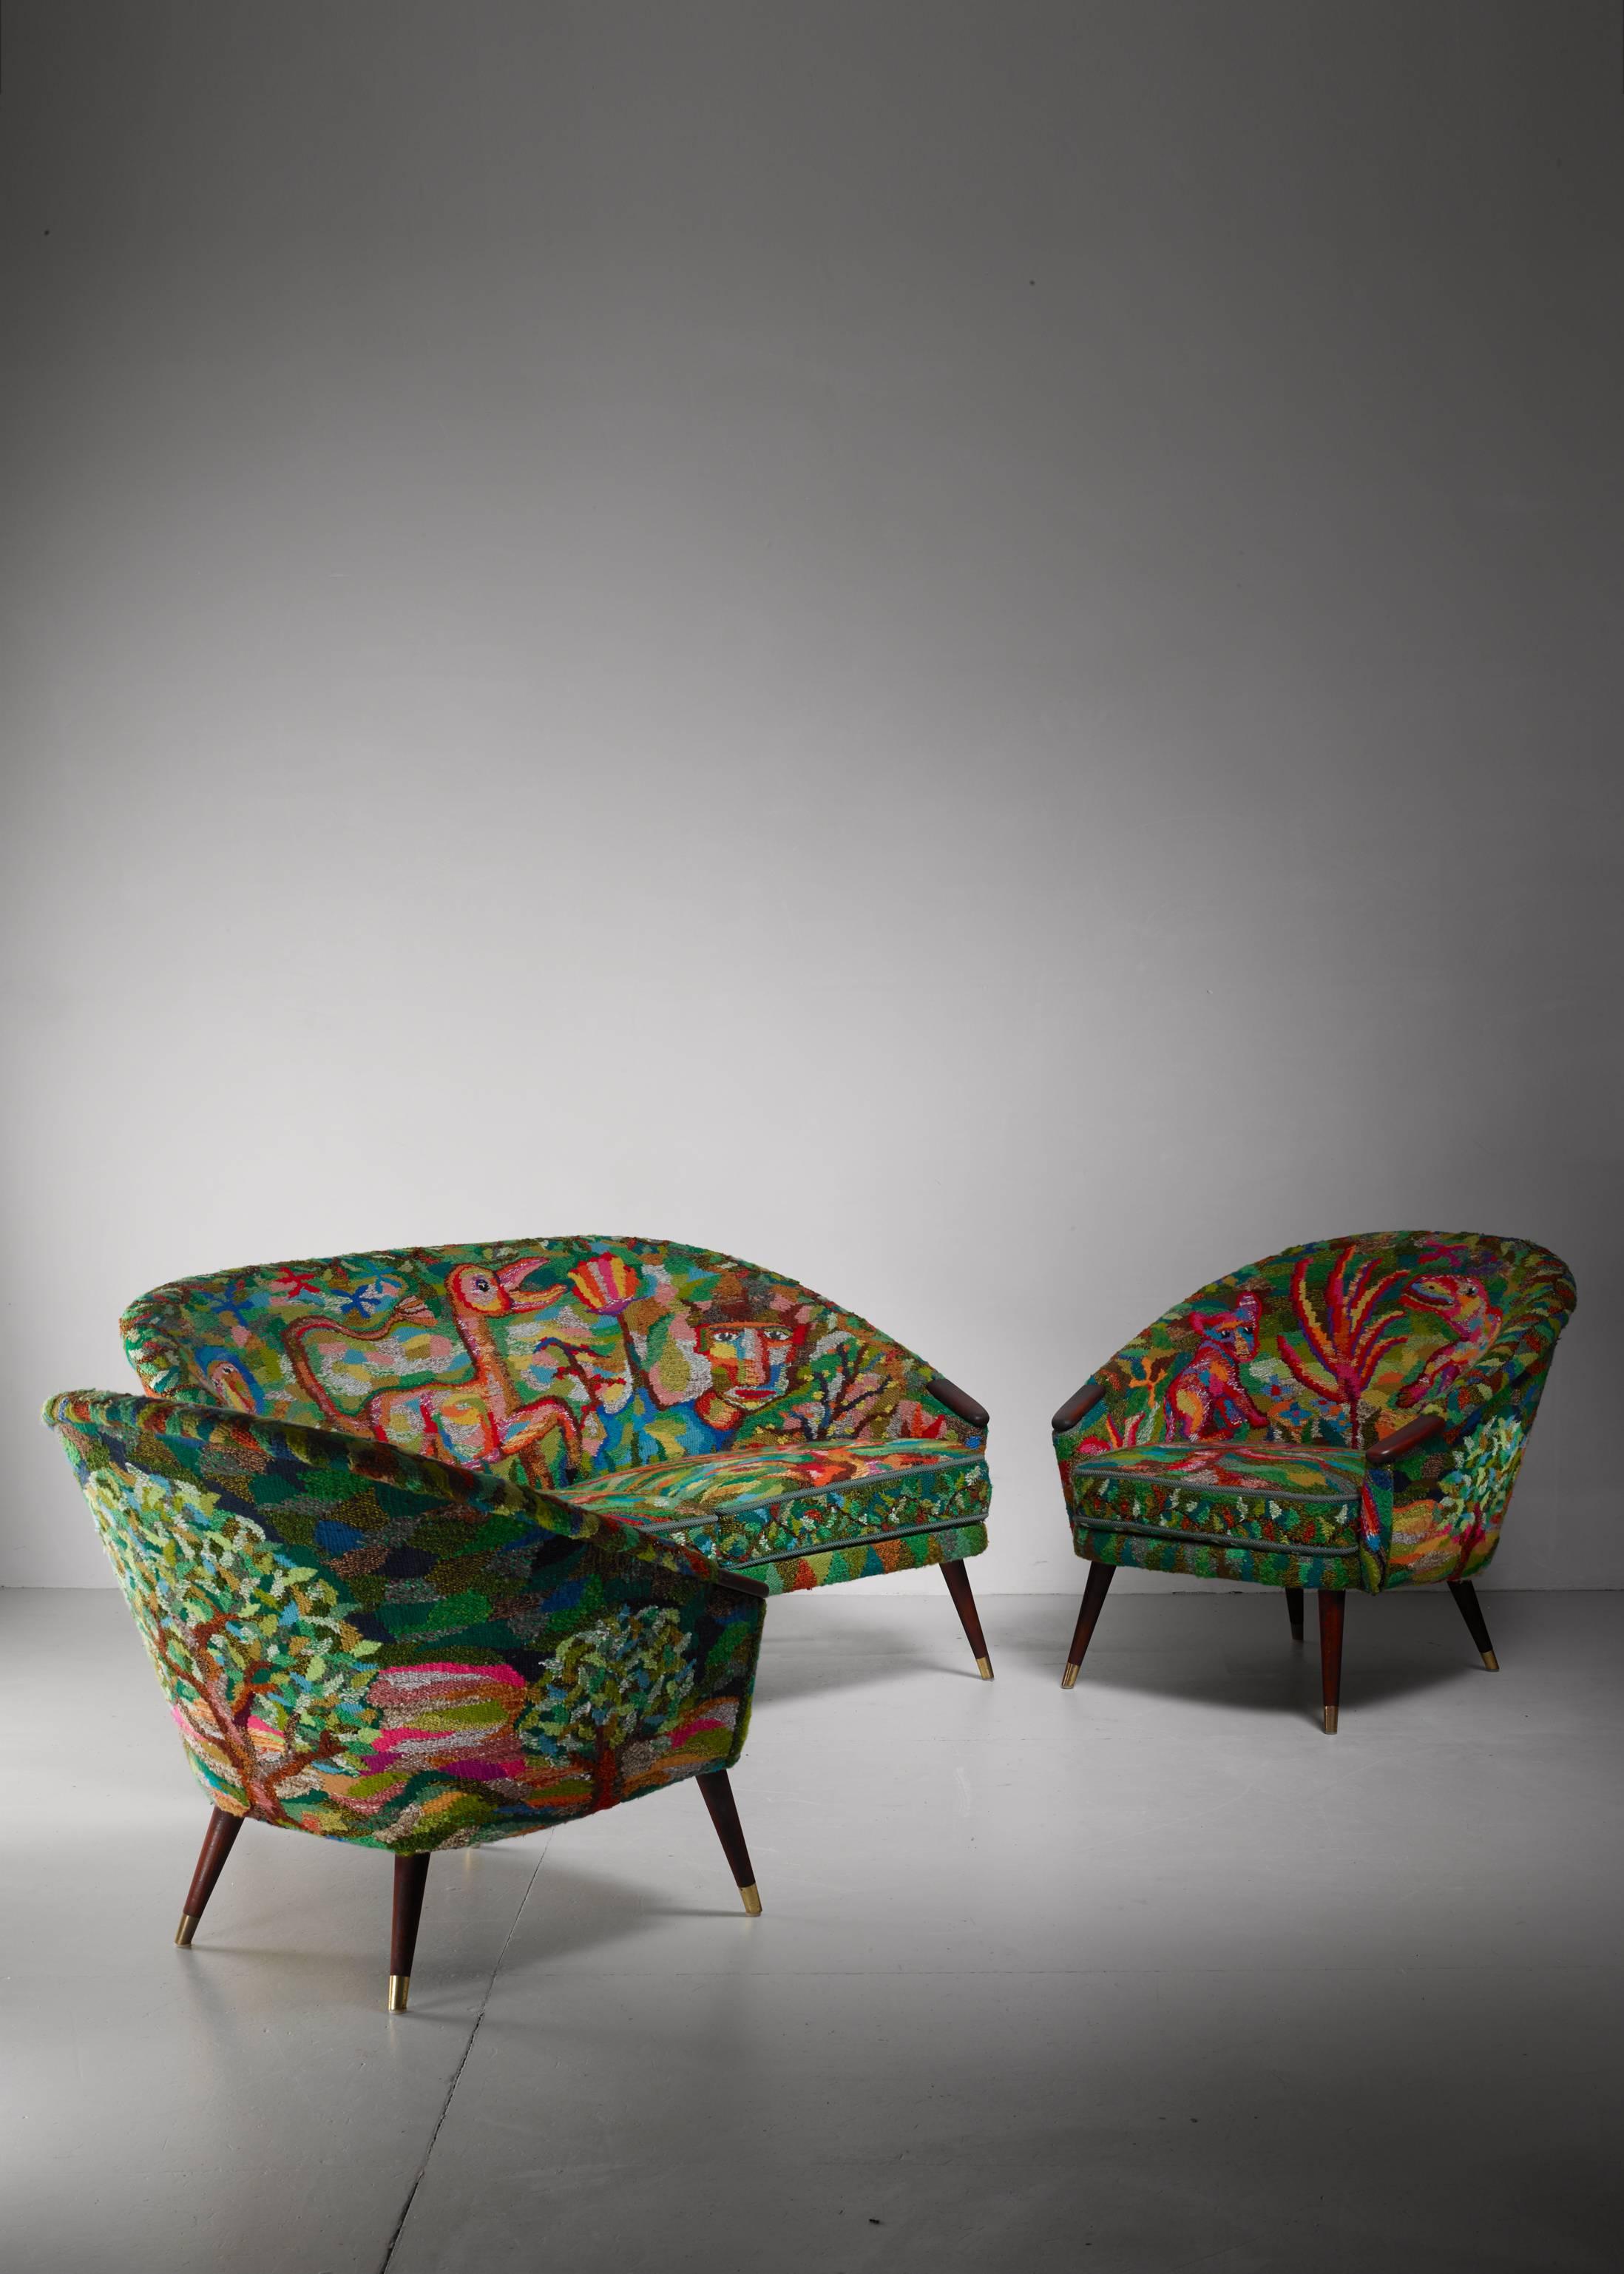 A set of a 1950s Swedish sofa and two lounge chairs, by Ragnar Helsén for AB Stjernmöbler. The upholstery is what makes this set unique. It is handwoven by textile artist Siri Søger in 1986 and shows animals and plants and is especially designed